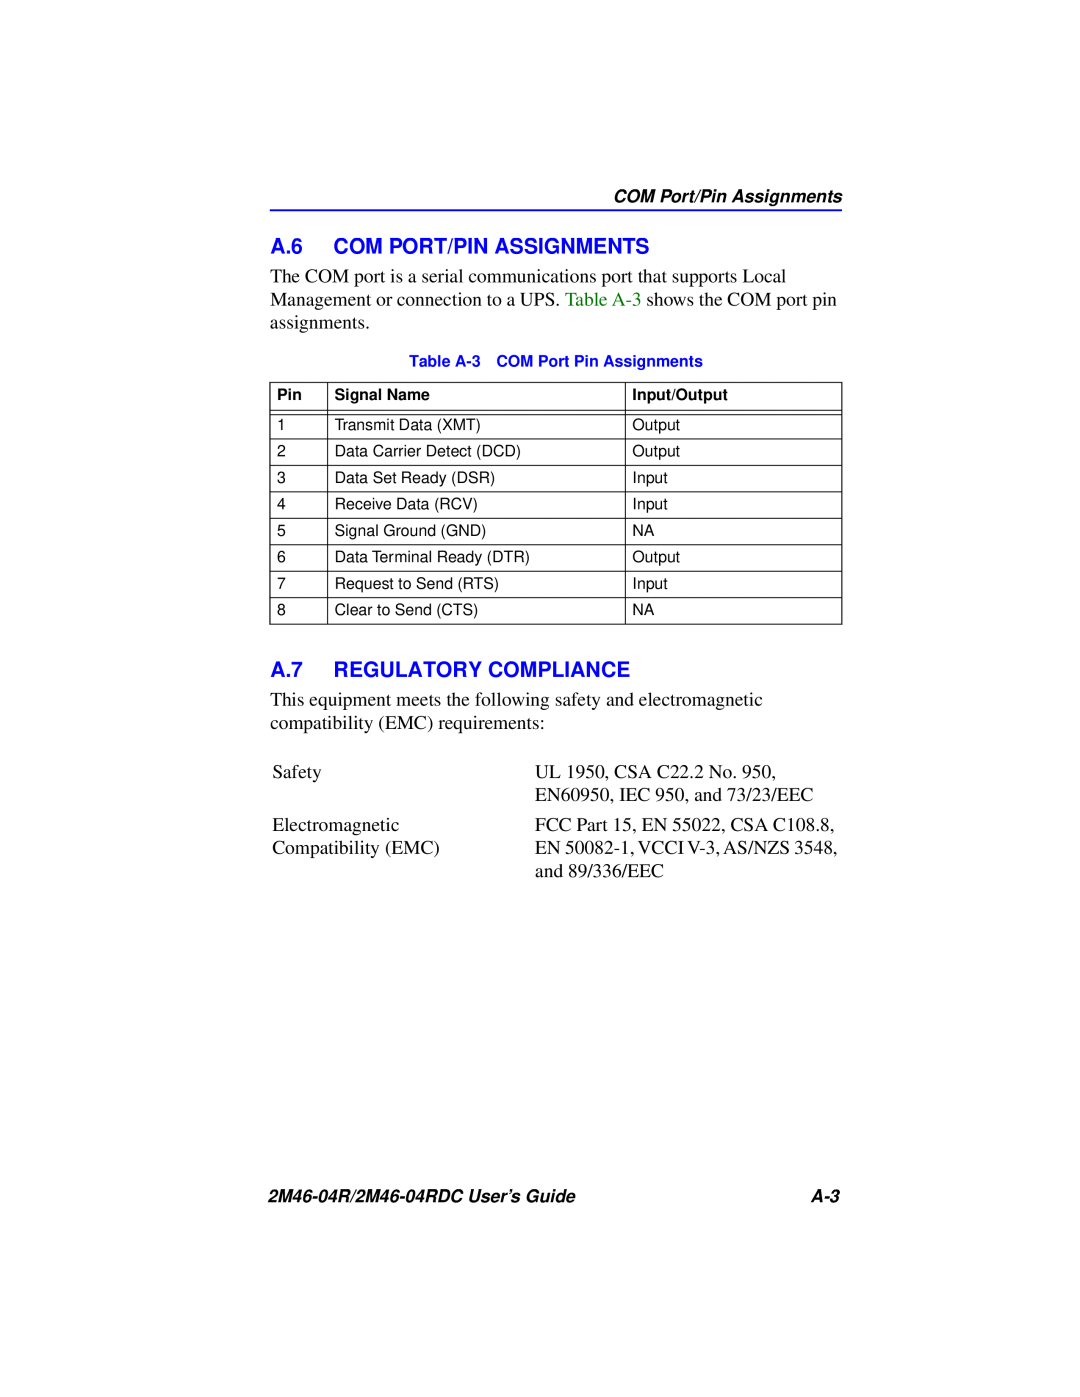 Cabletron Systems pmn manual A.6 COM PORT/PIN ASSIGNMENTS, A.7 REGULATORY COMPLIANCE 